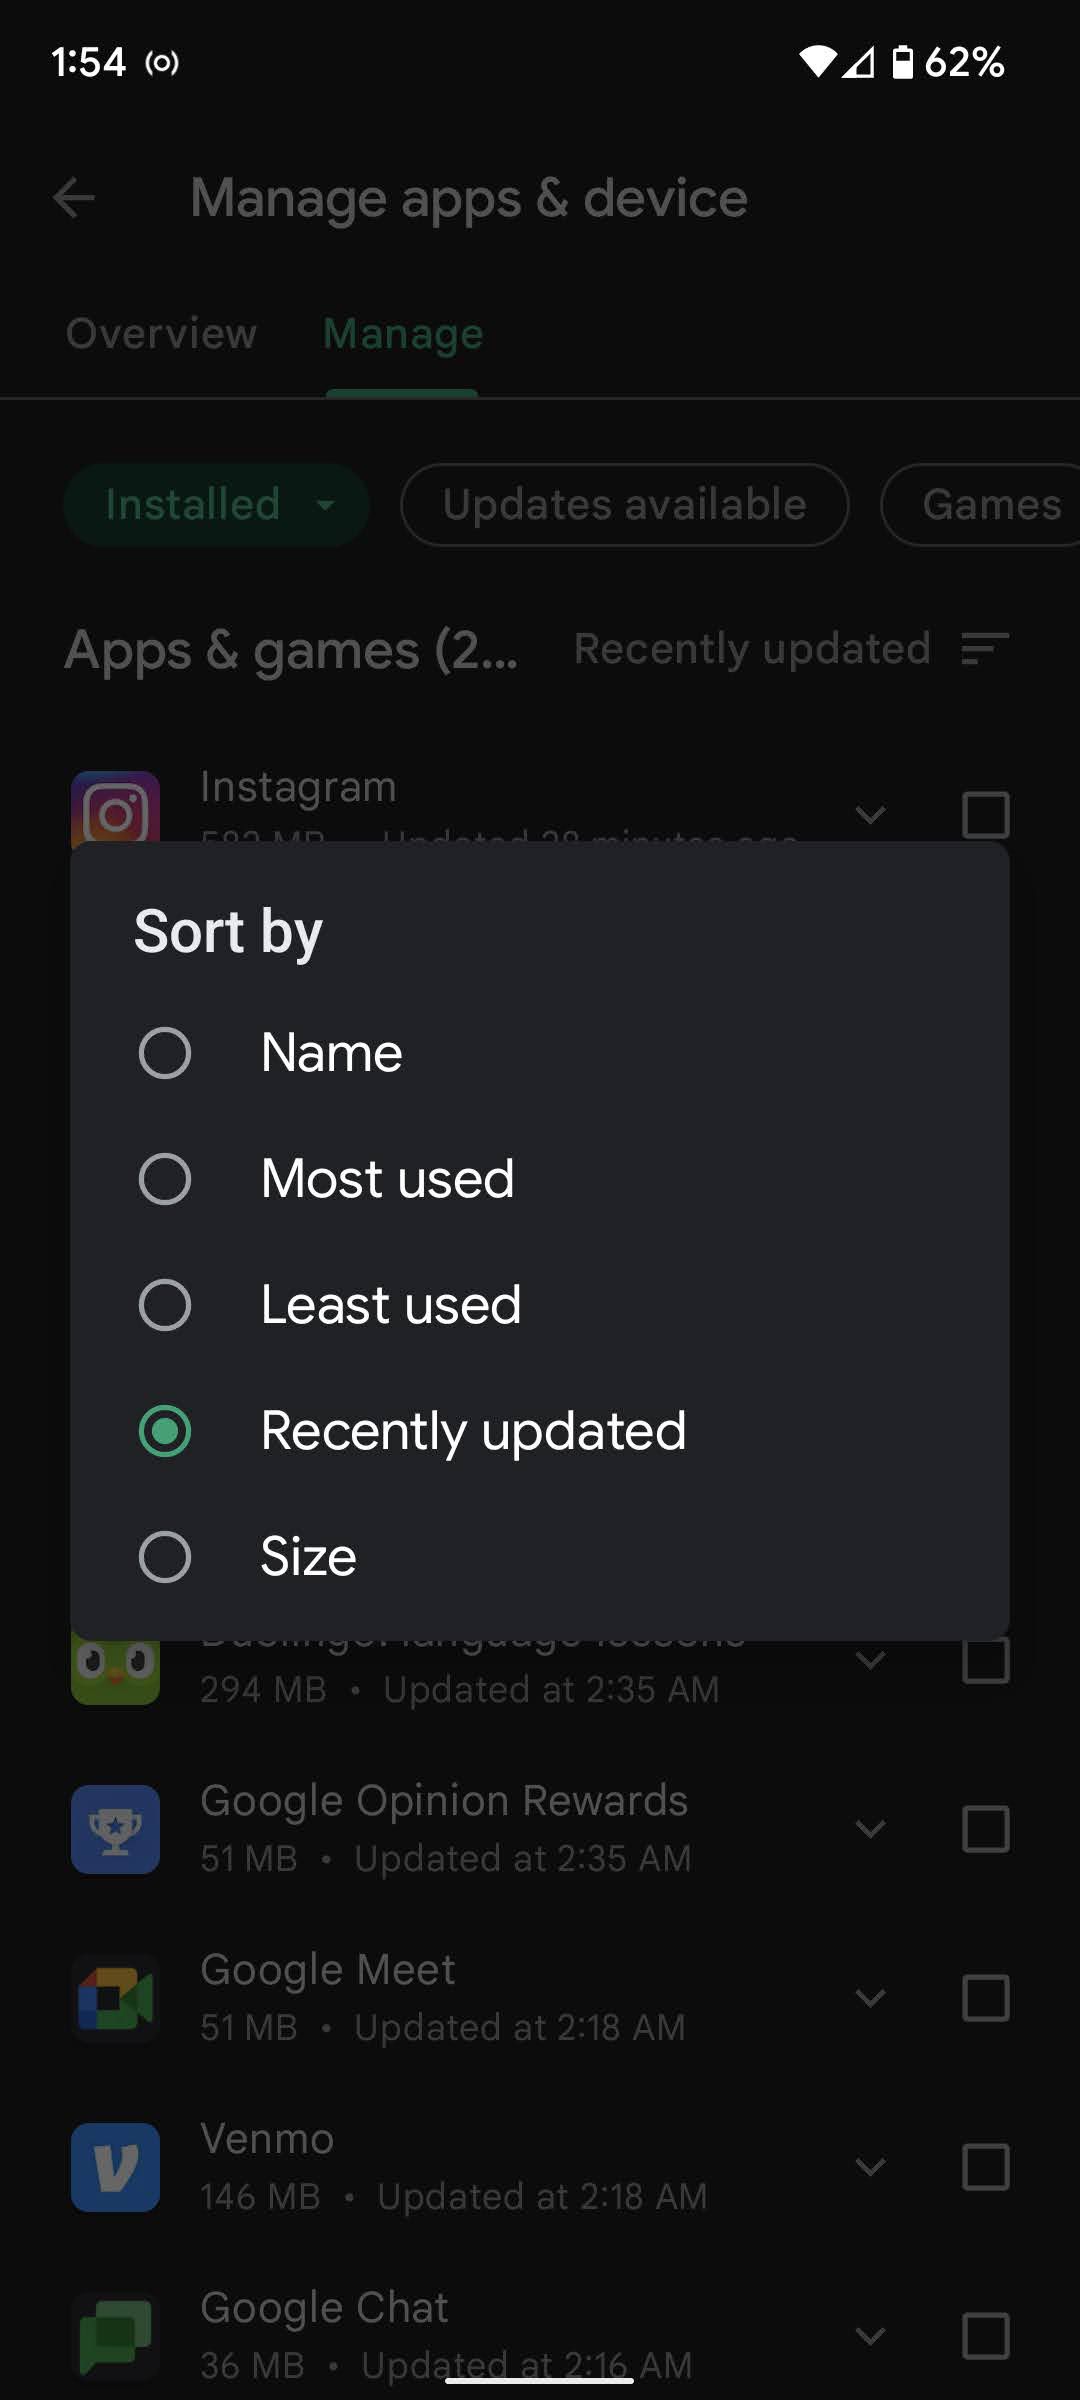 To find out which apps you can get rid of, sort by least used.